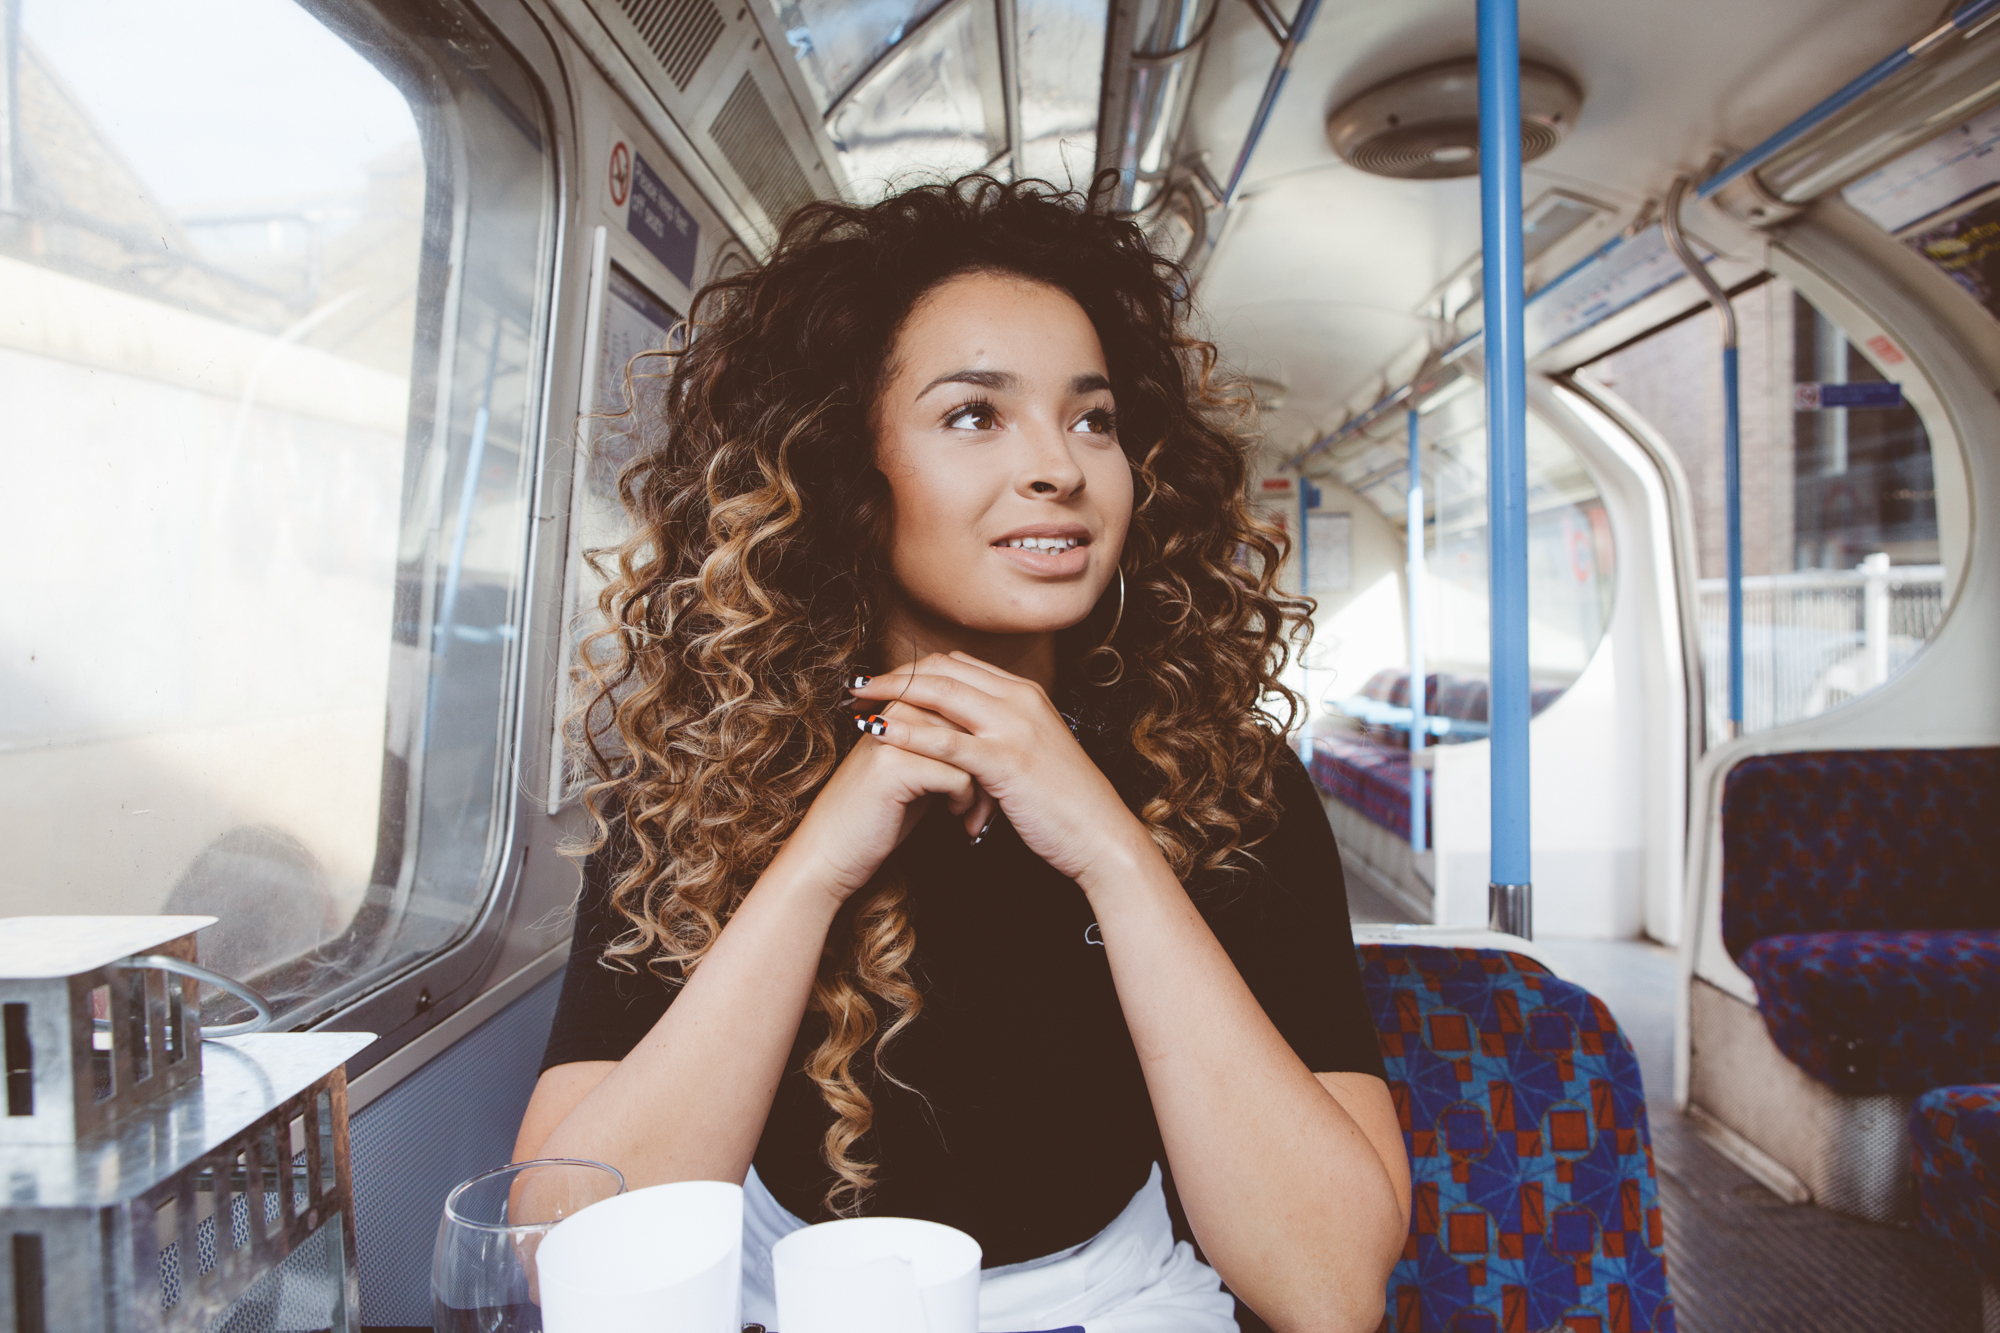 Ella Eyre talks food and passion in her most revealing interview yet